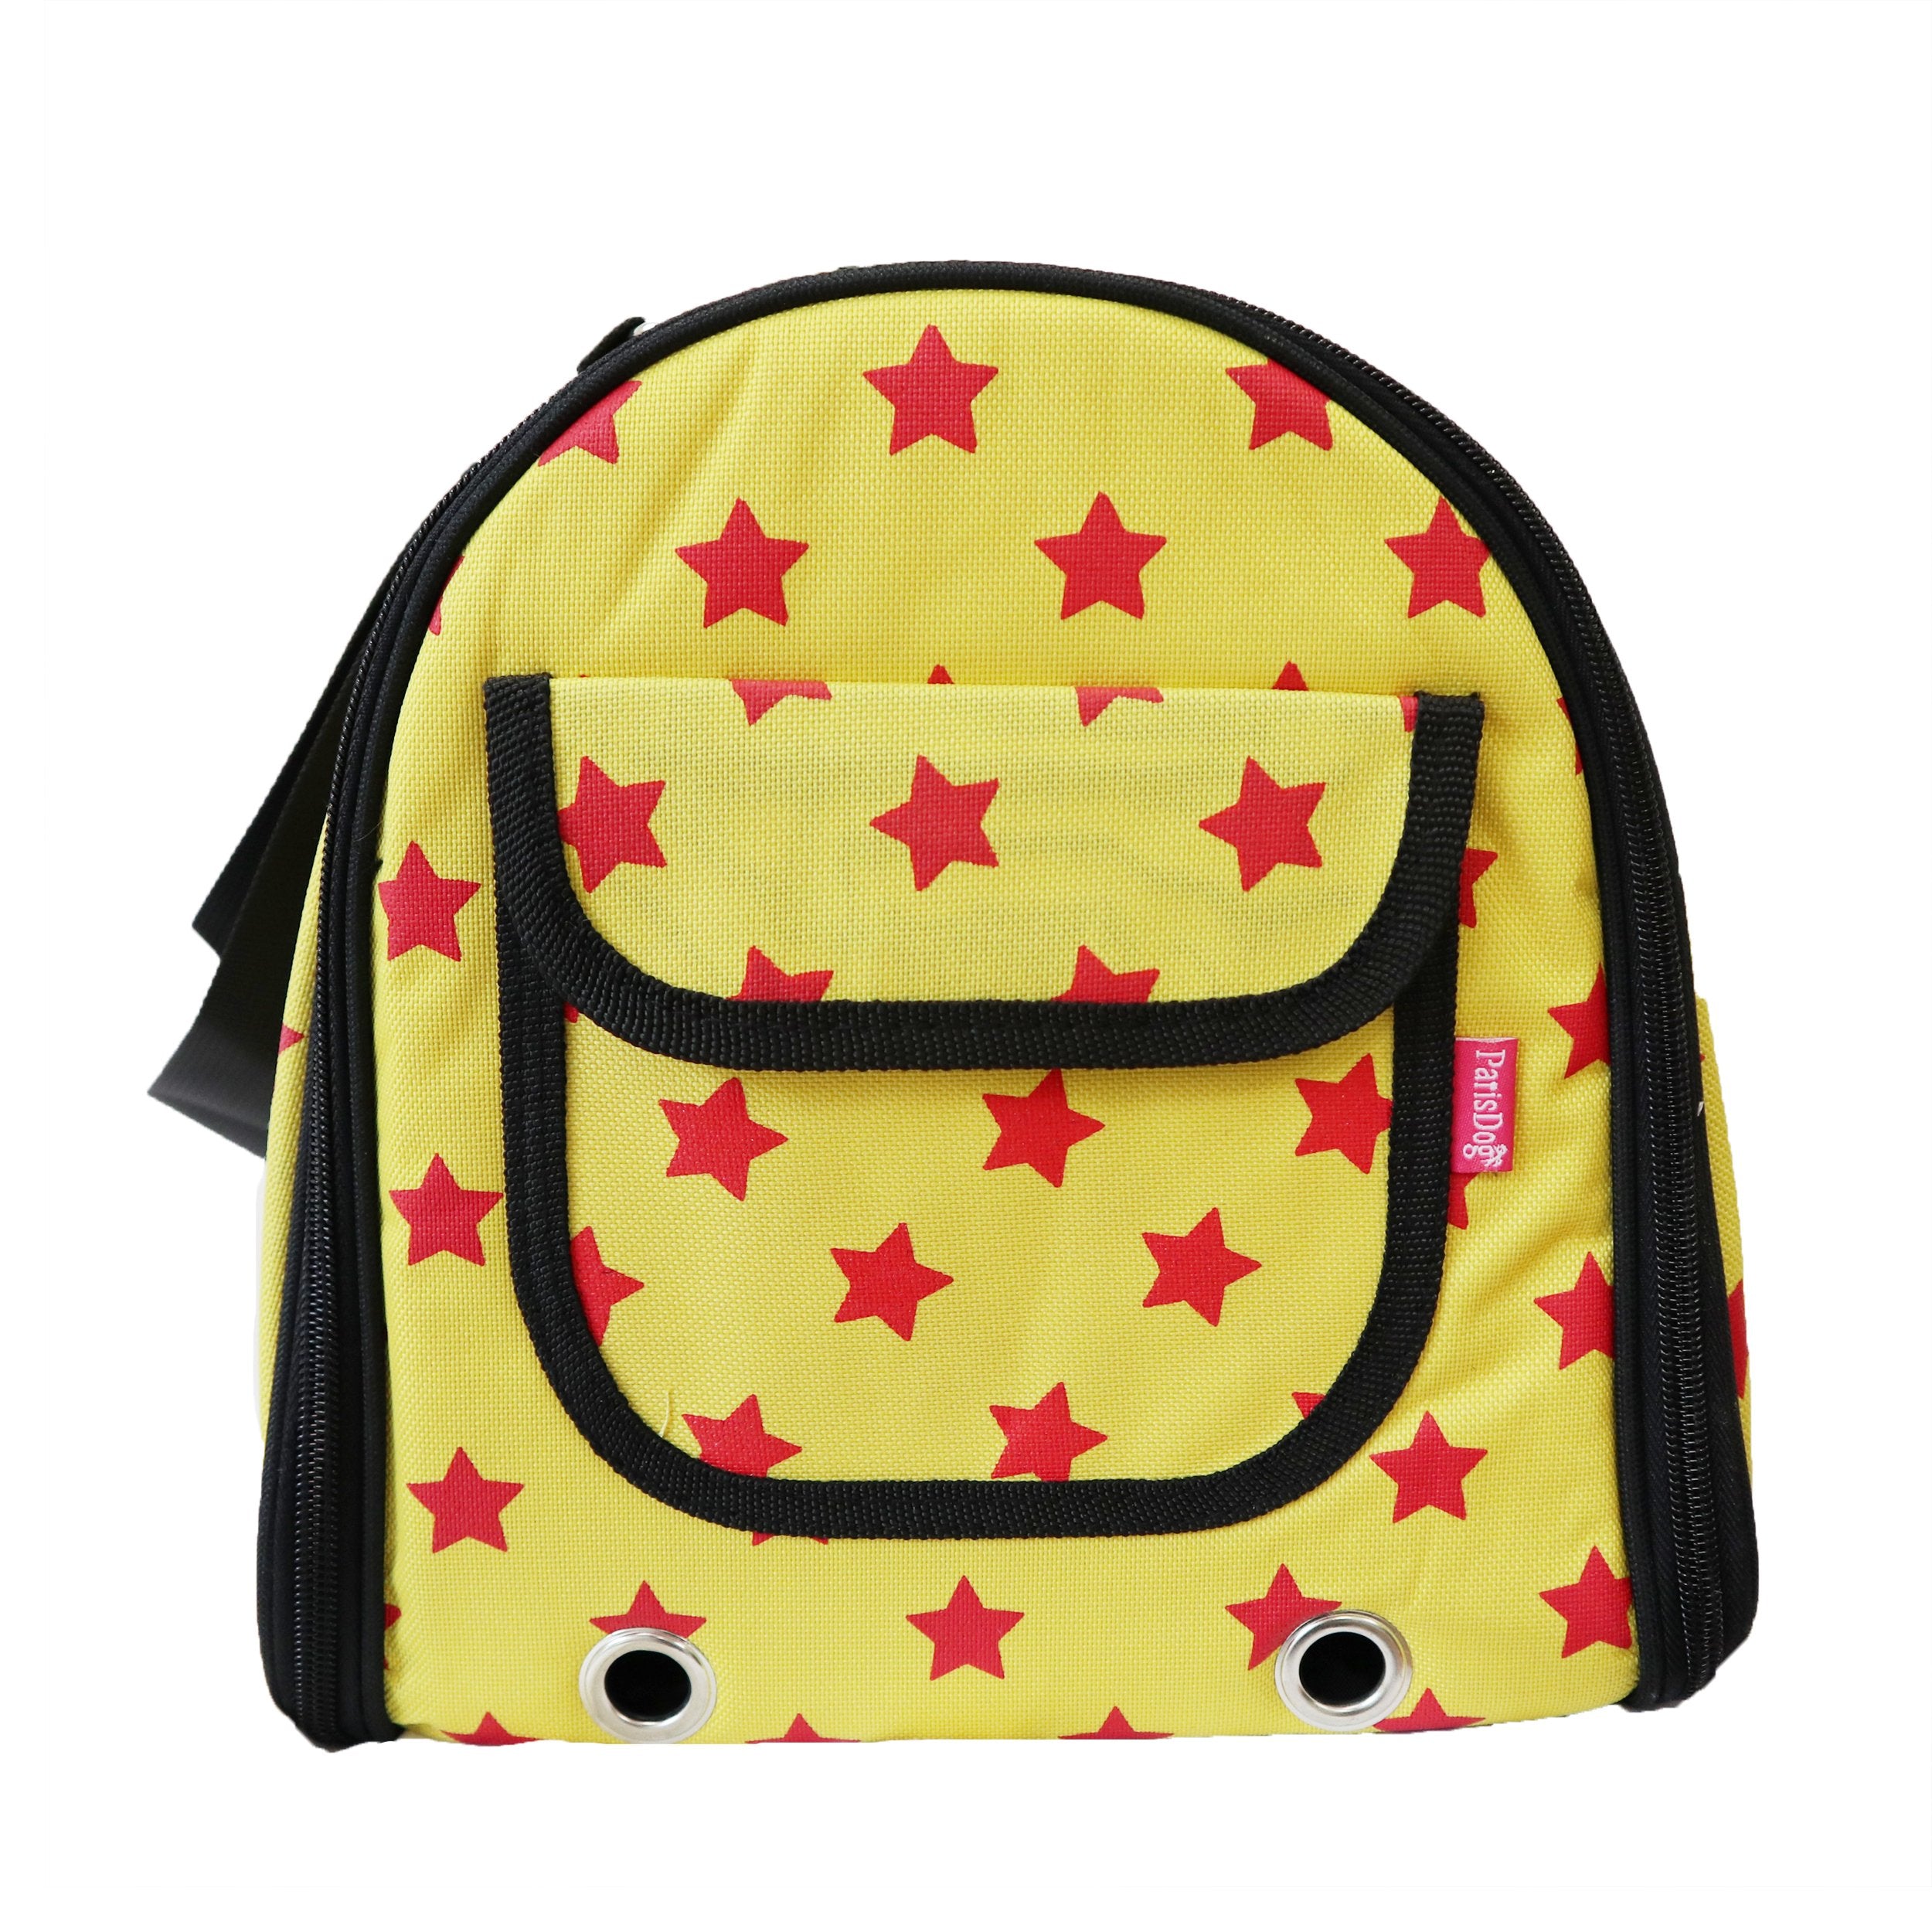 Paris Dog Yellow & Red Carrier for Small Dogs and Cats